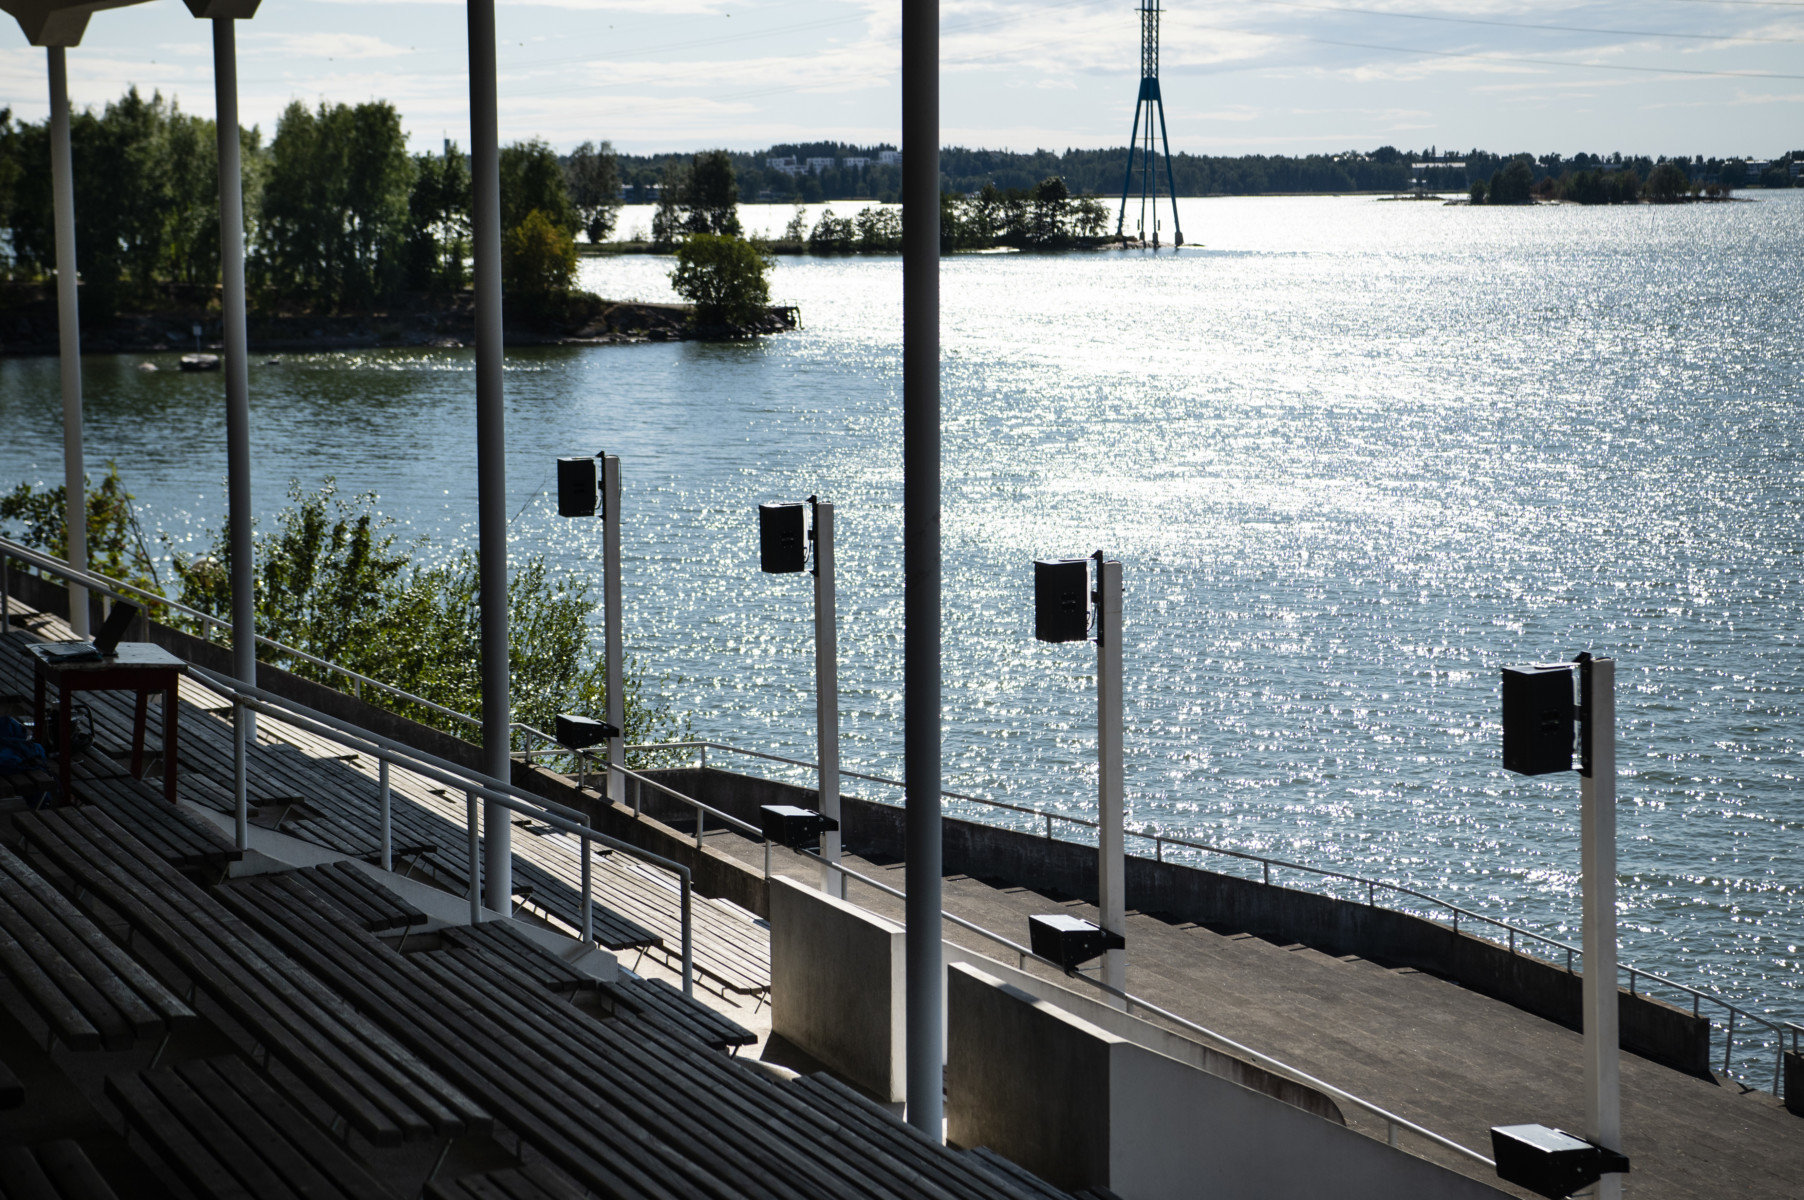 Image of a rowing stadium in Helsinki in a sunny day. Four big loud speakers are facing the stadium and behind them is a sea view glimmering in sun.